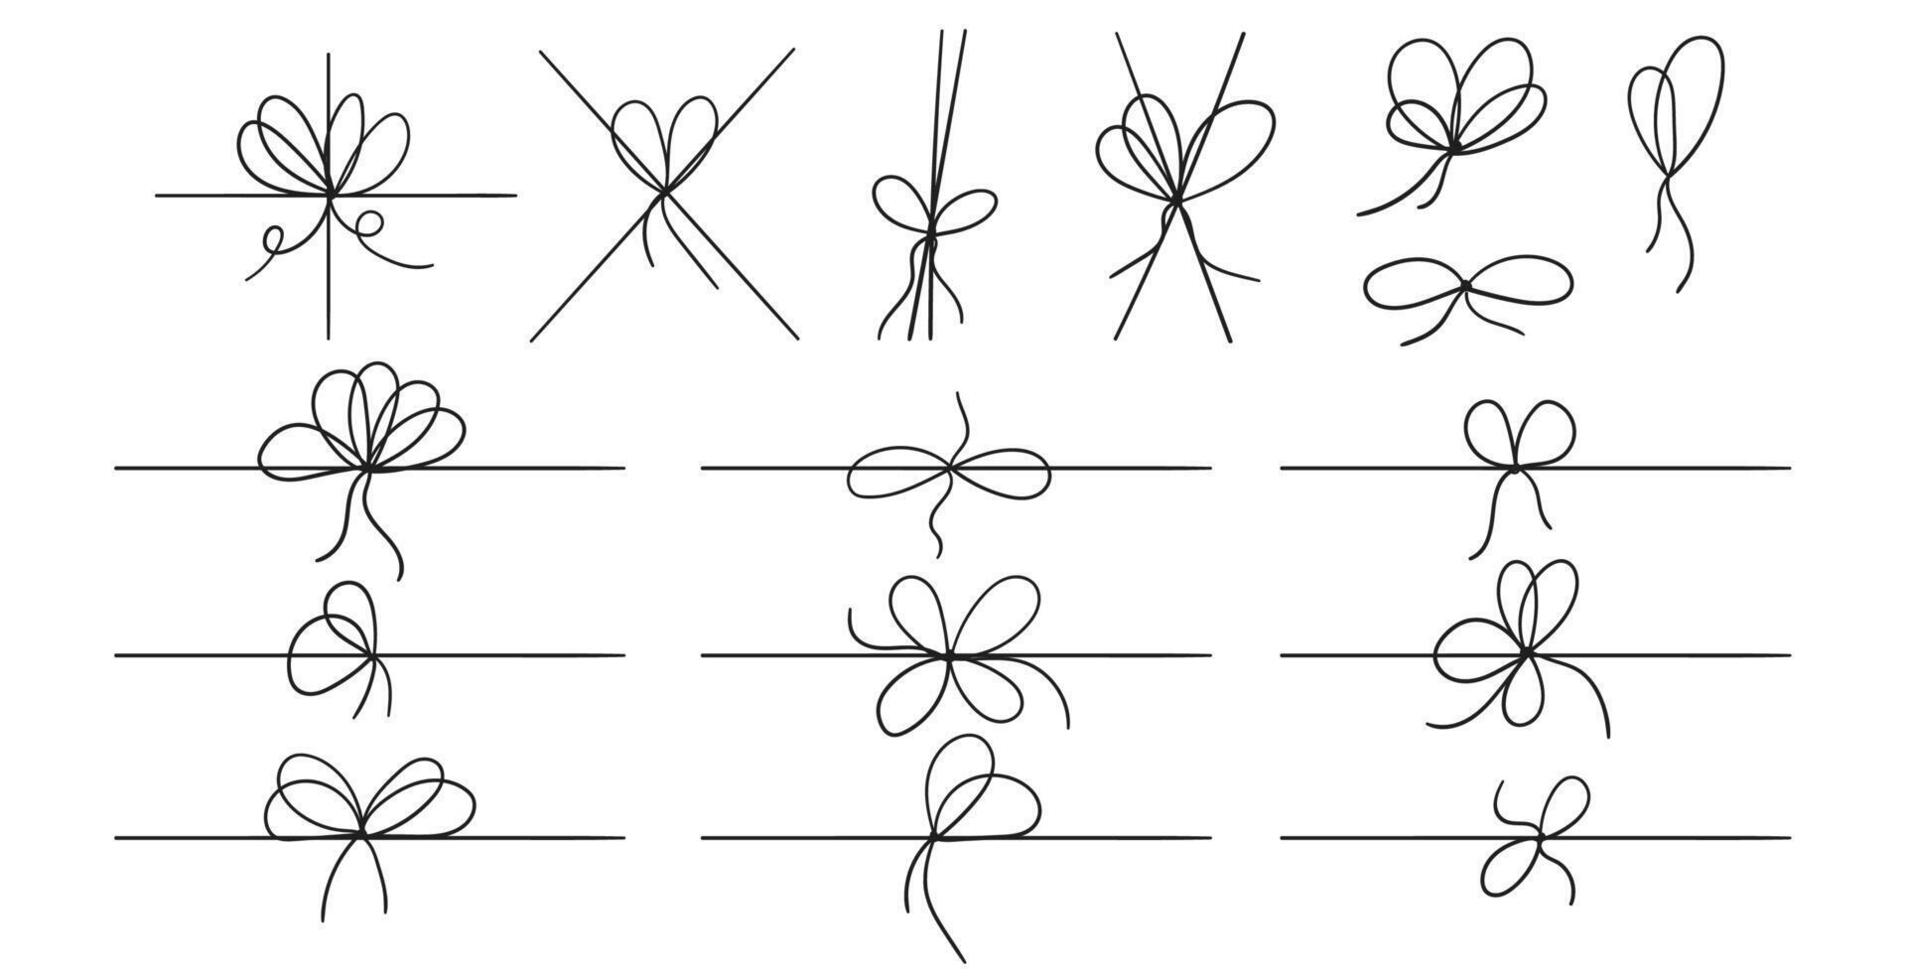 A line of bows on a ribbon to decorate a gift. doodle style ropes, simple thin vector